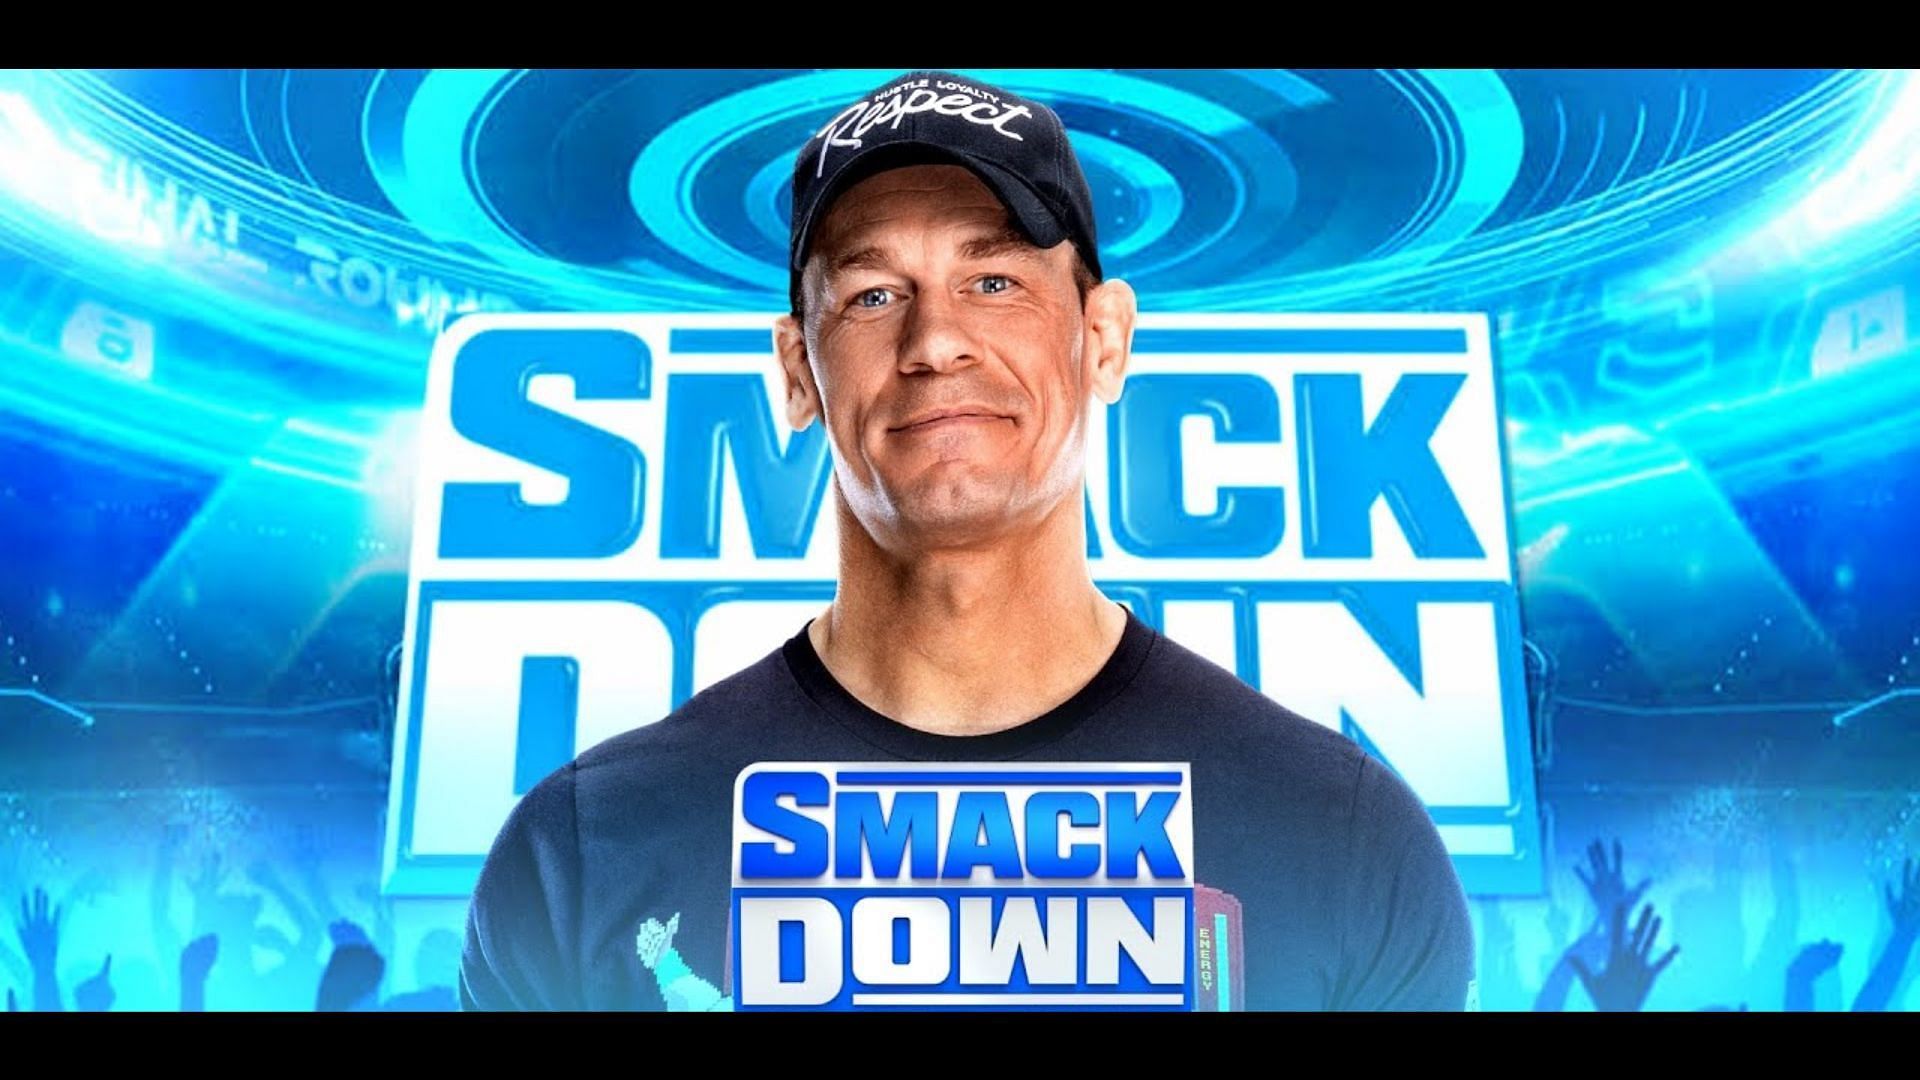 John Cena wrestled his first match in over a year on the last episode of SmackDown in 2022